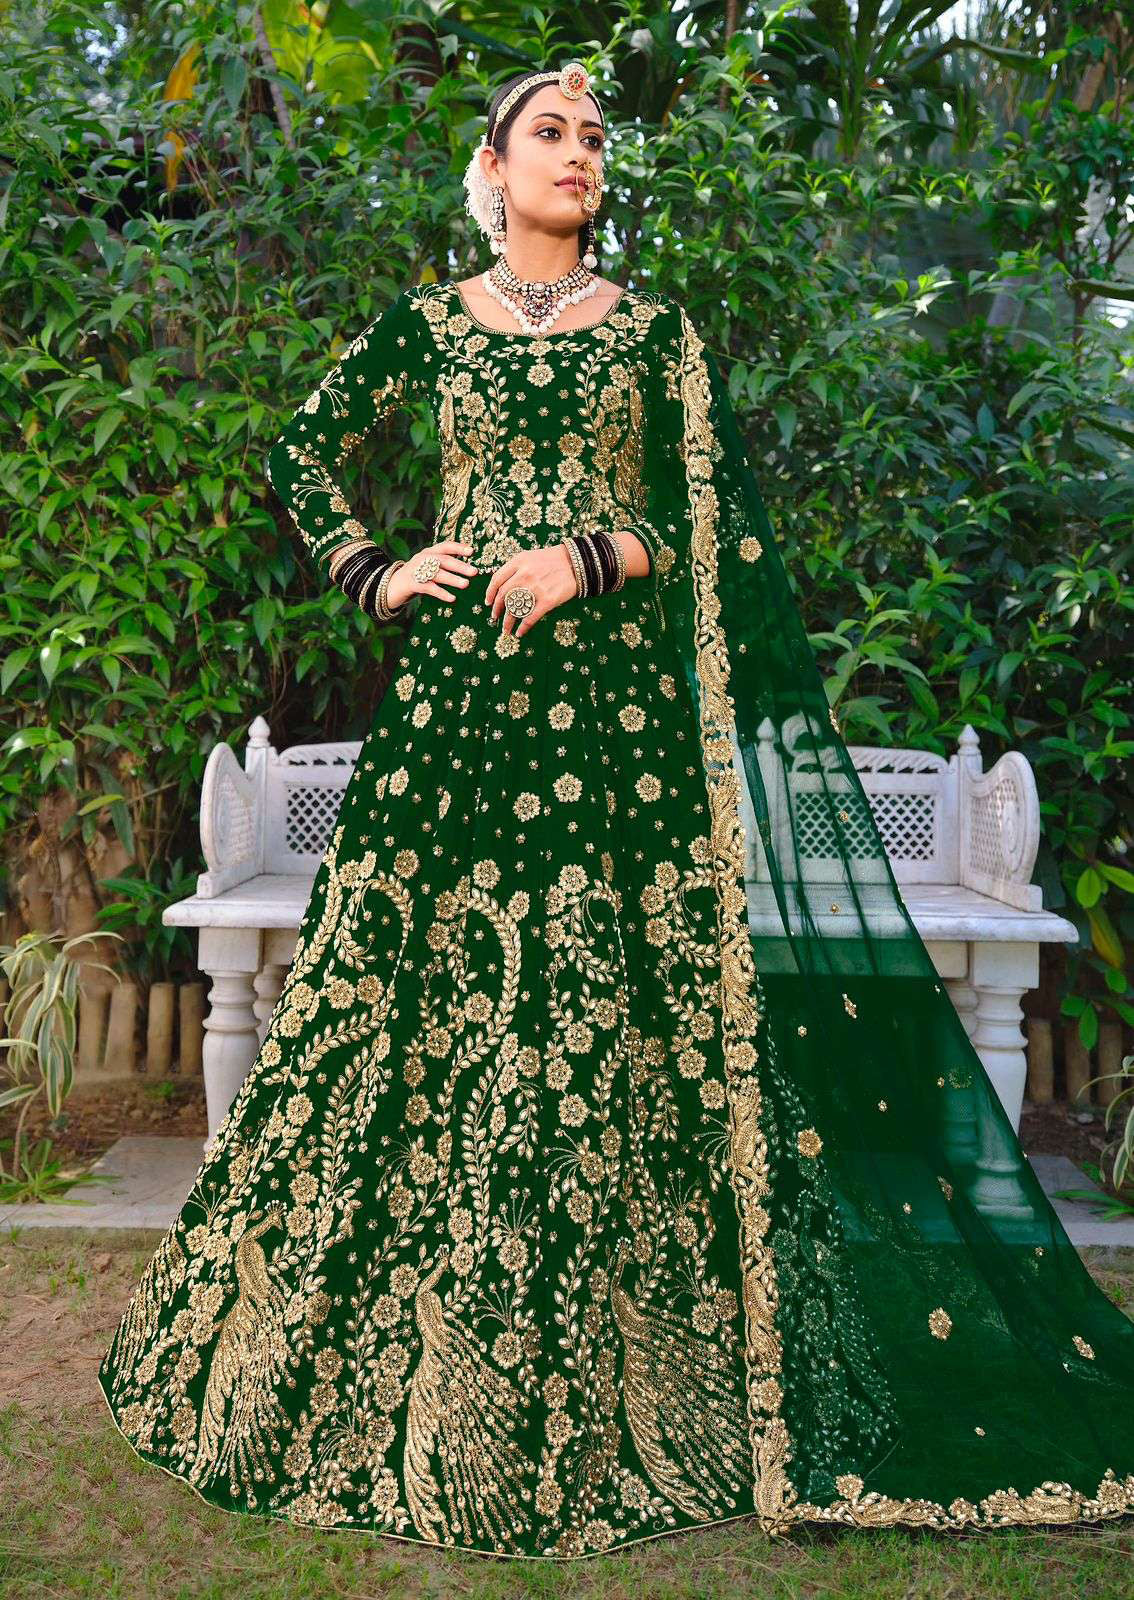 Lehengas are a stunning and versatile choice of Indian clothing